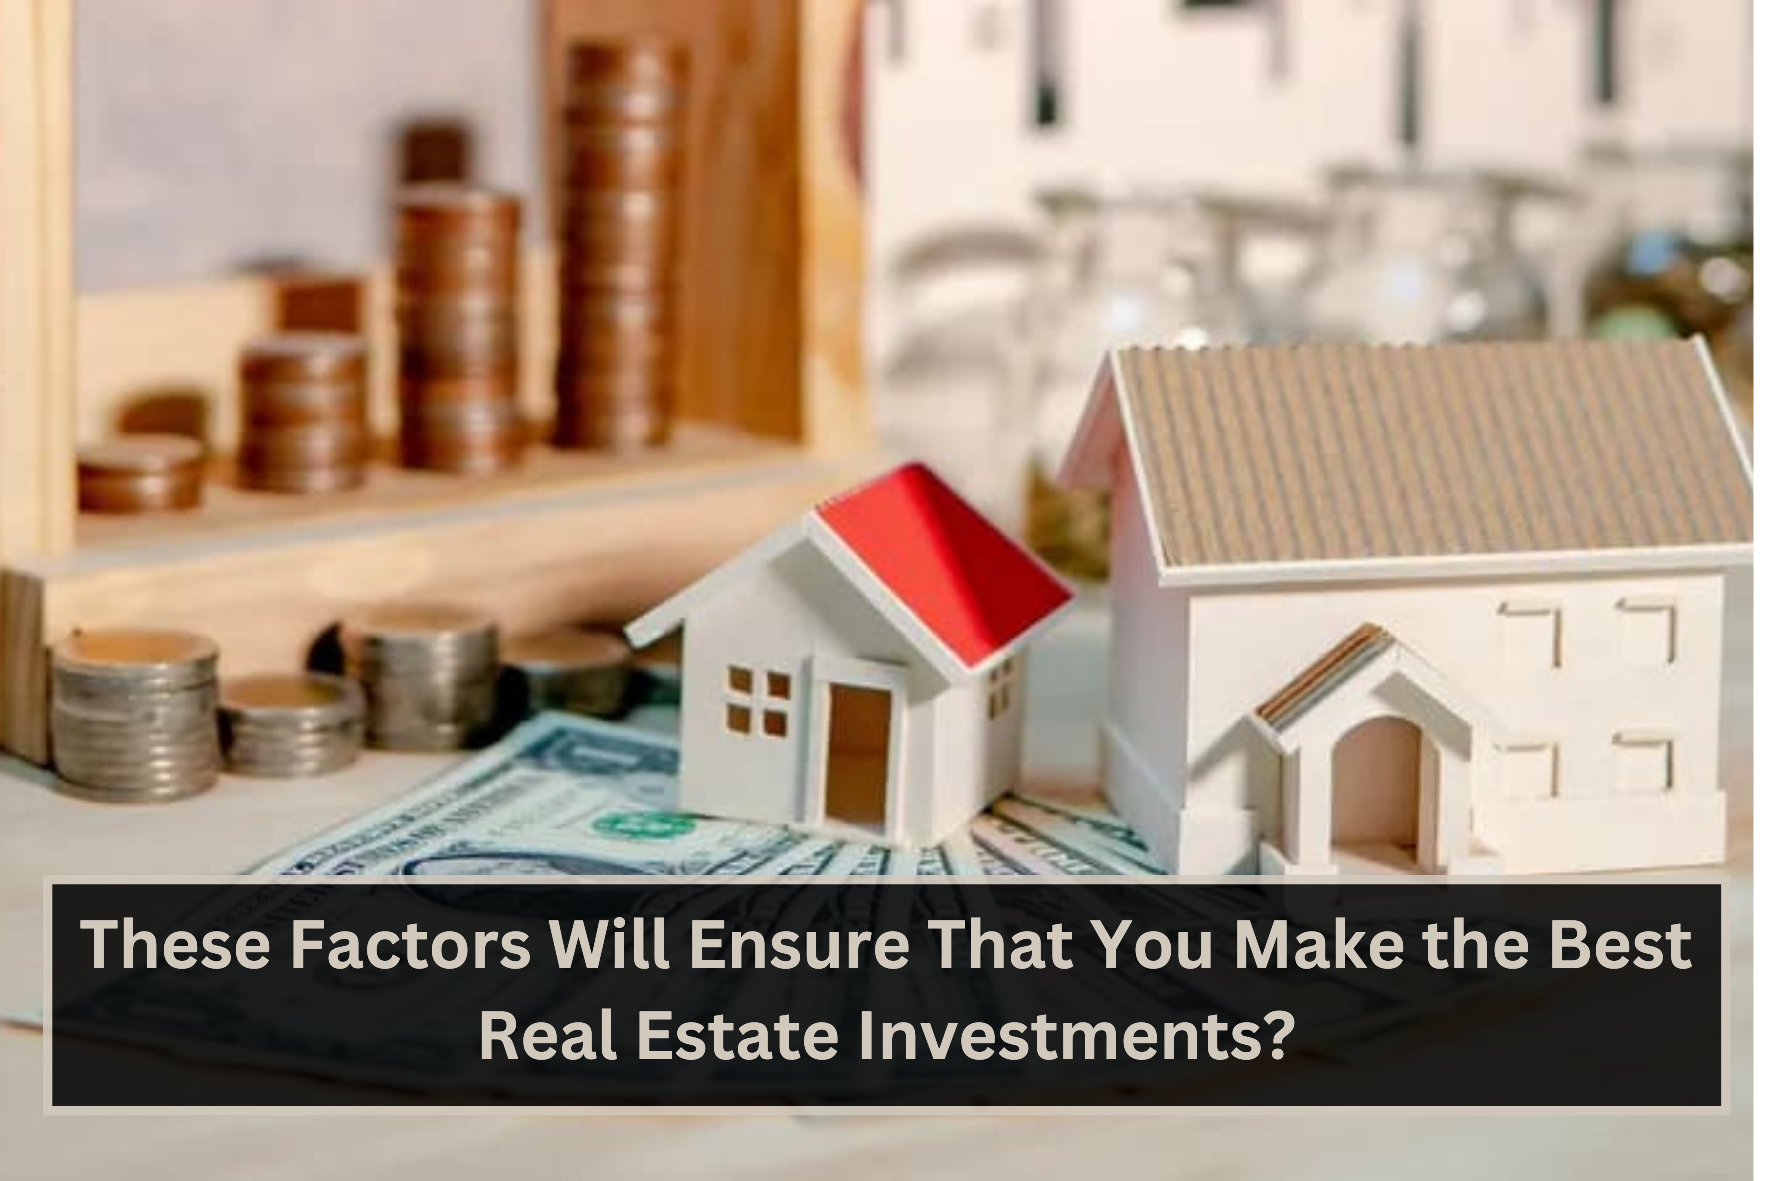 uploads/blog/These_Factors_Will_Ensure_That_You_Make_the_Best_Real_Estate_Investments.png